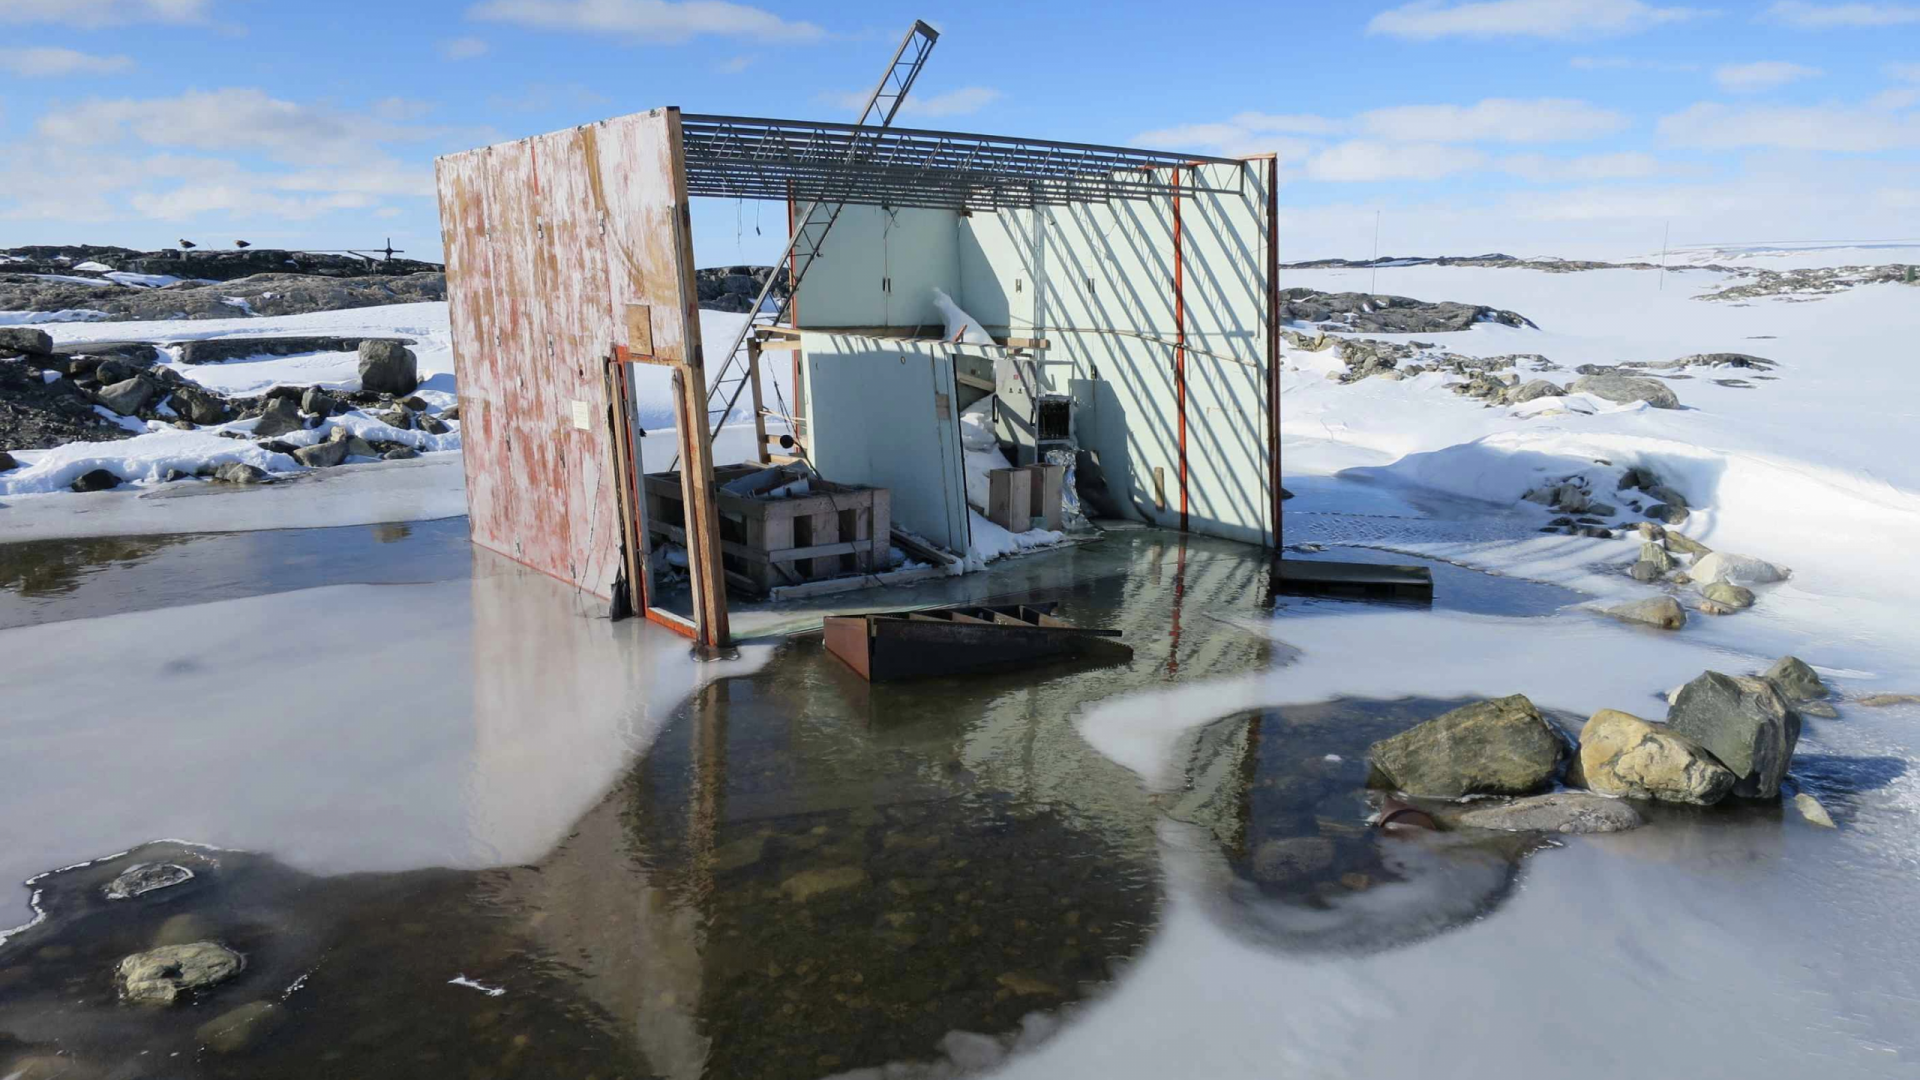 View of an architectural installation in Antarctica